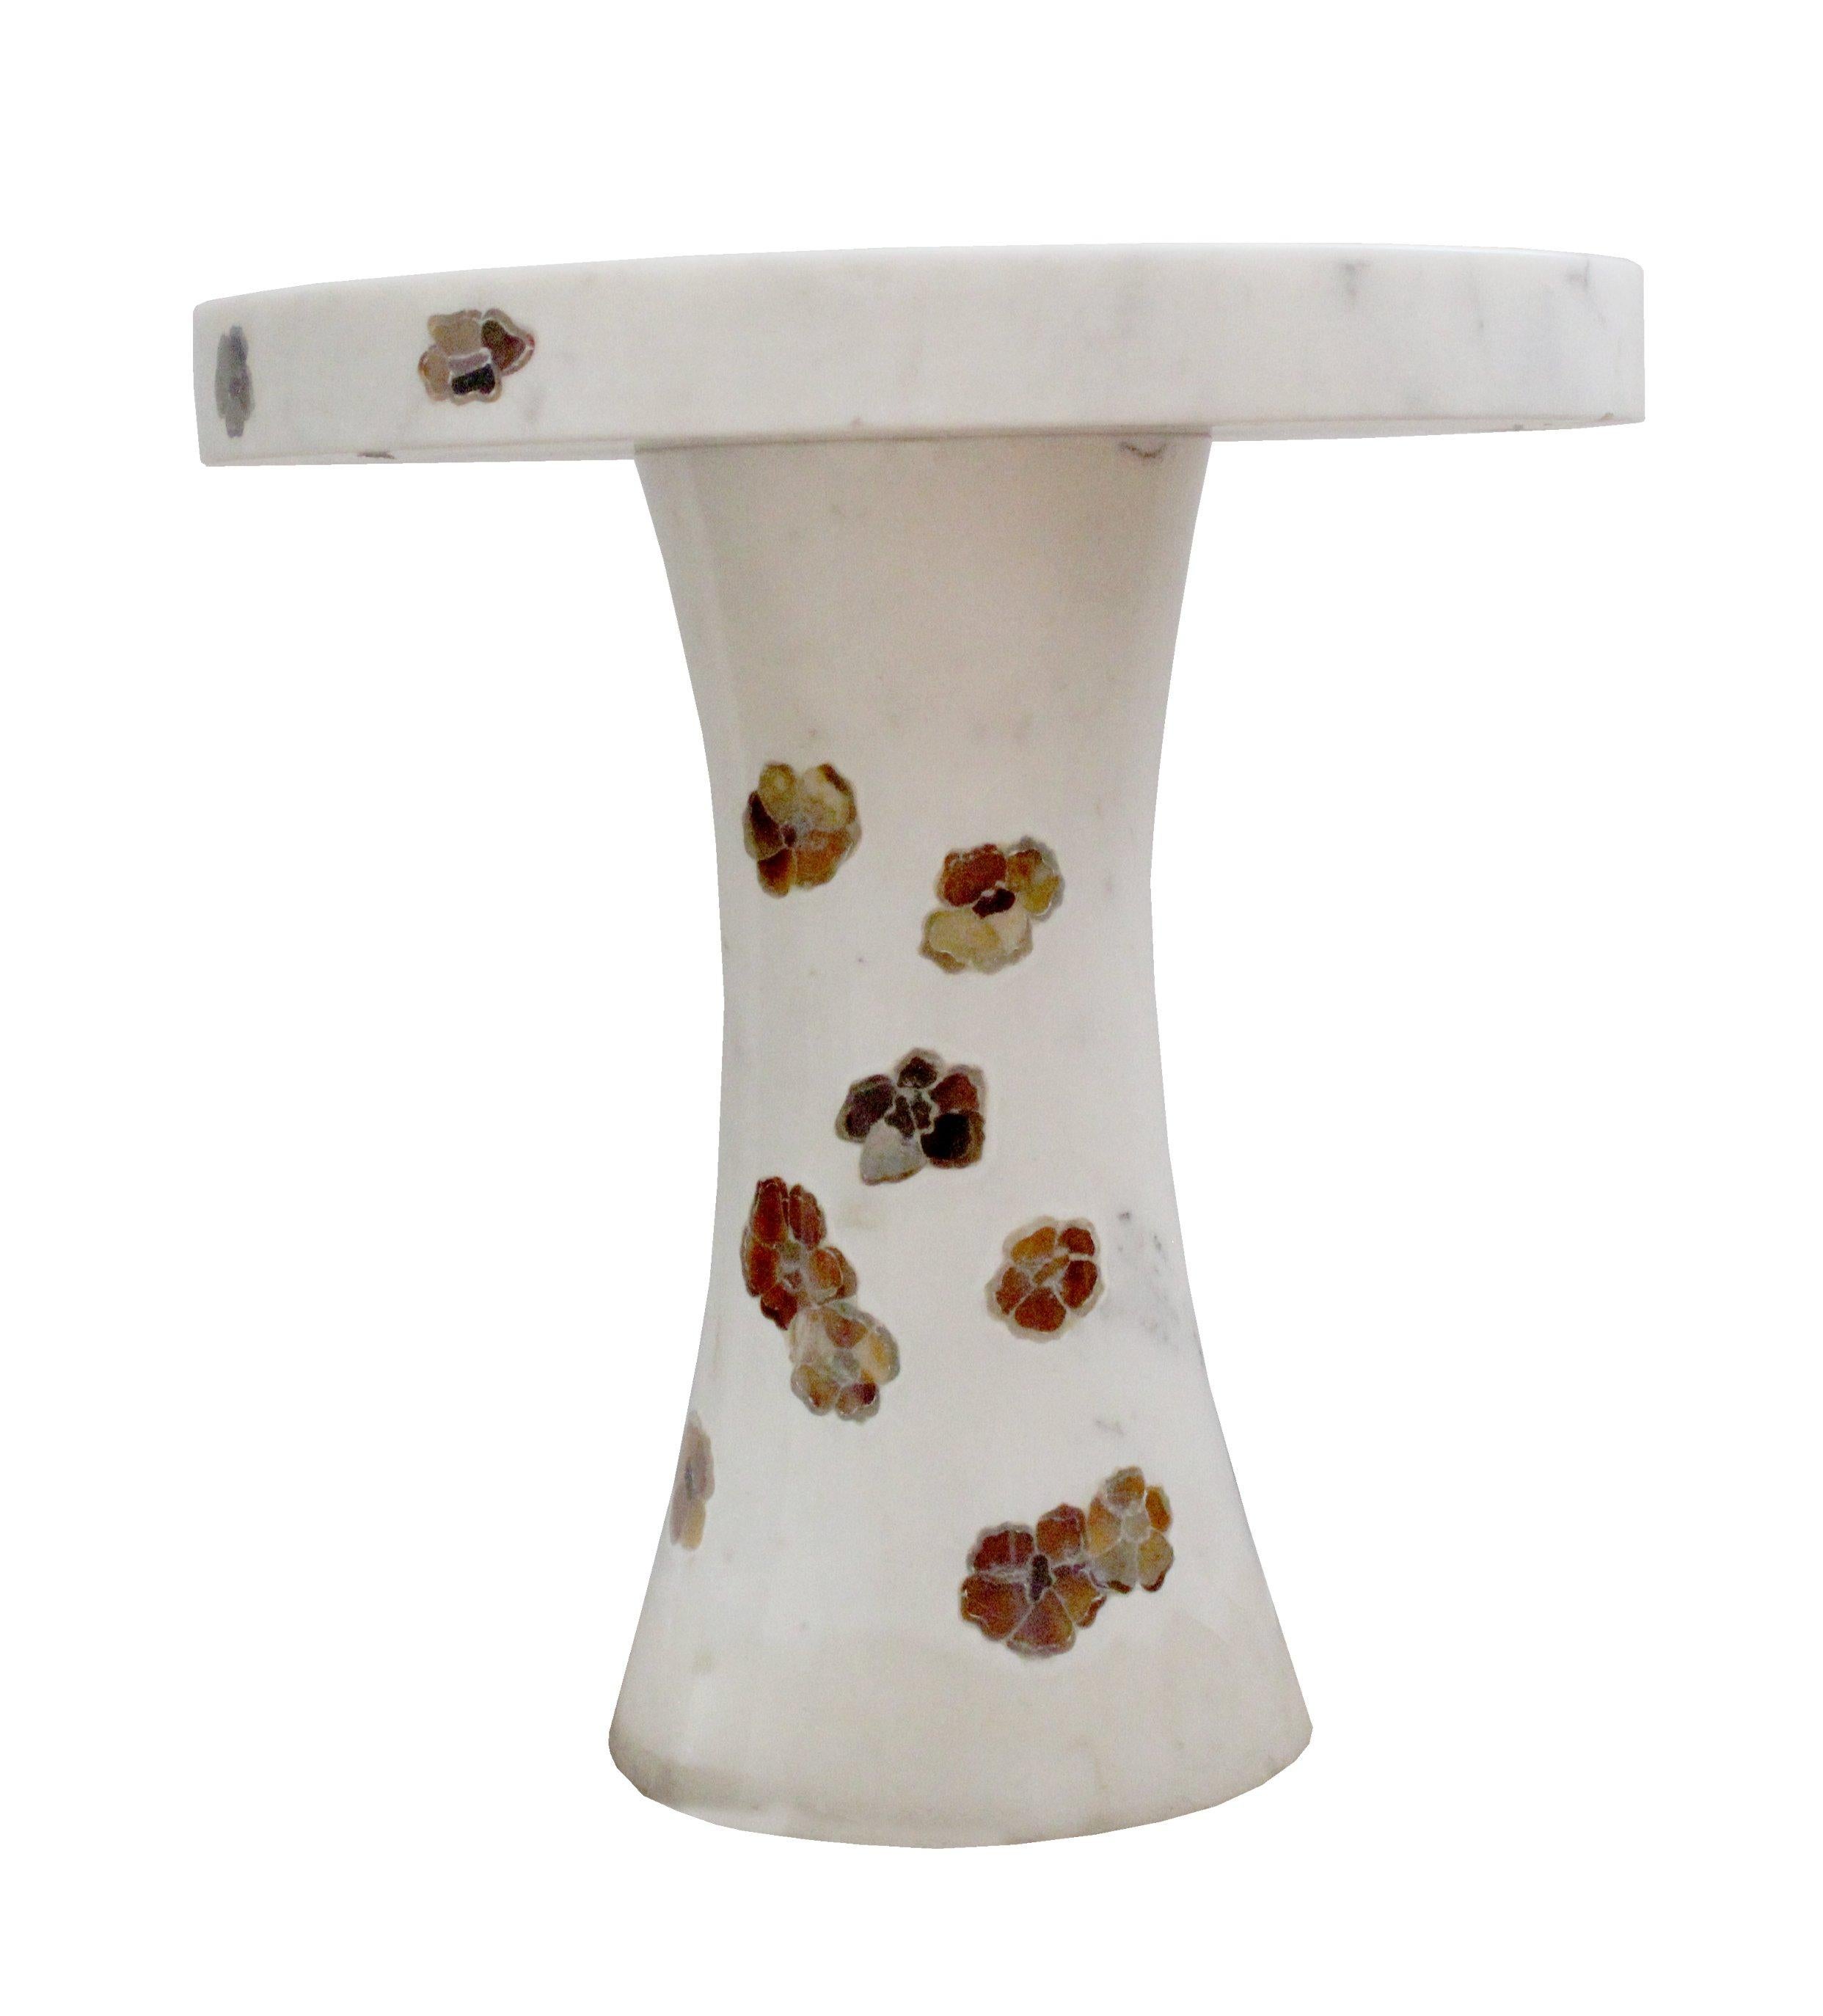 The Scattered Pansies table is a part of the Ornamenti collection. Delicately cut pieces of agate, tiger eyes, mother of pearl and other semi precious stones are carefully inlaid into the base stone by our master craftsmen. The collection features